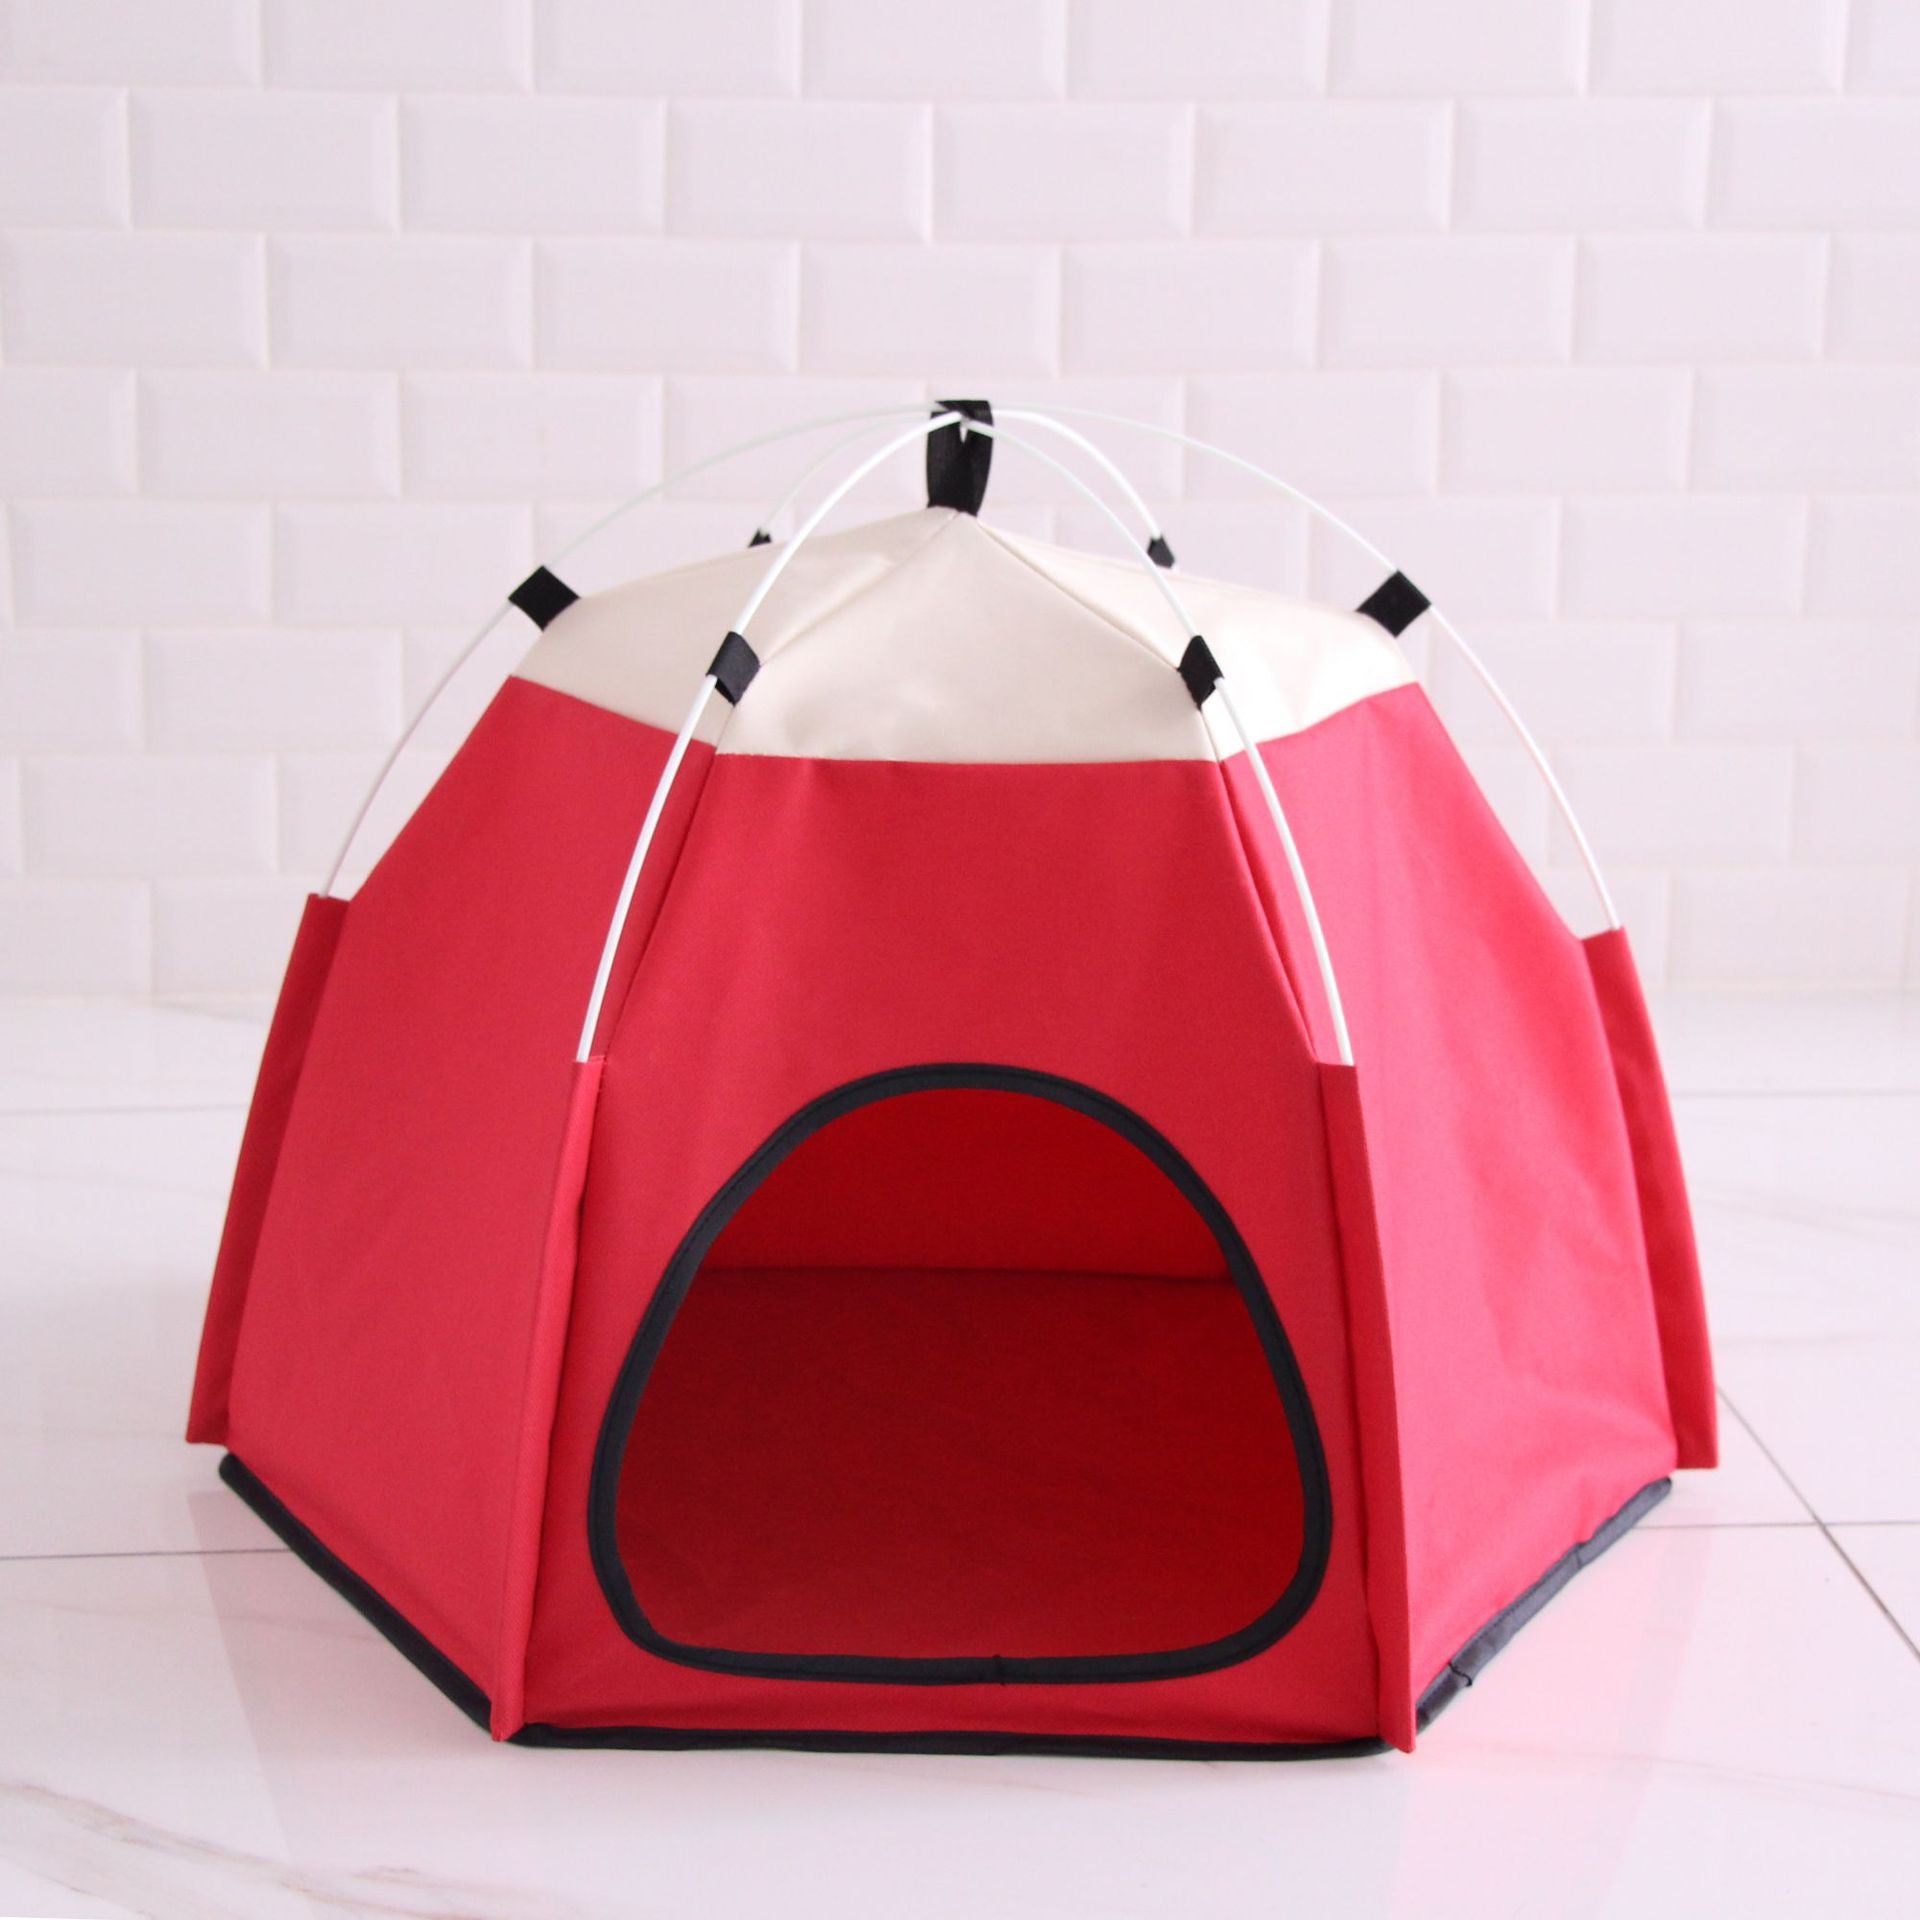 Kennel Warm Tent for Pet -  My BrioTop